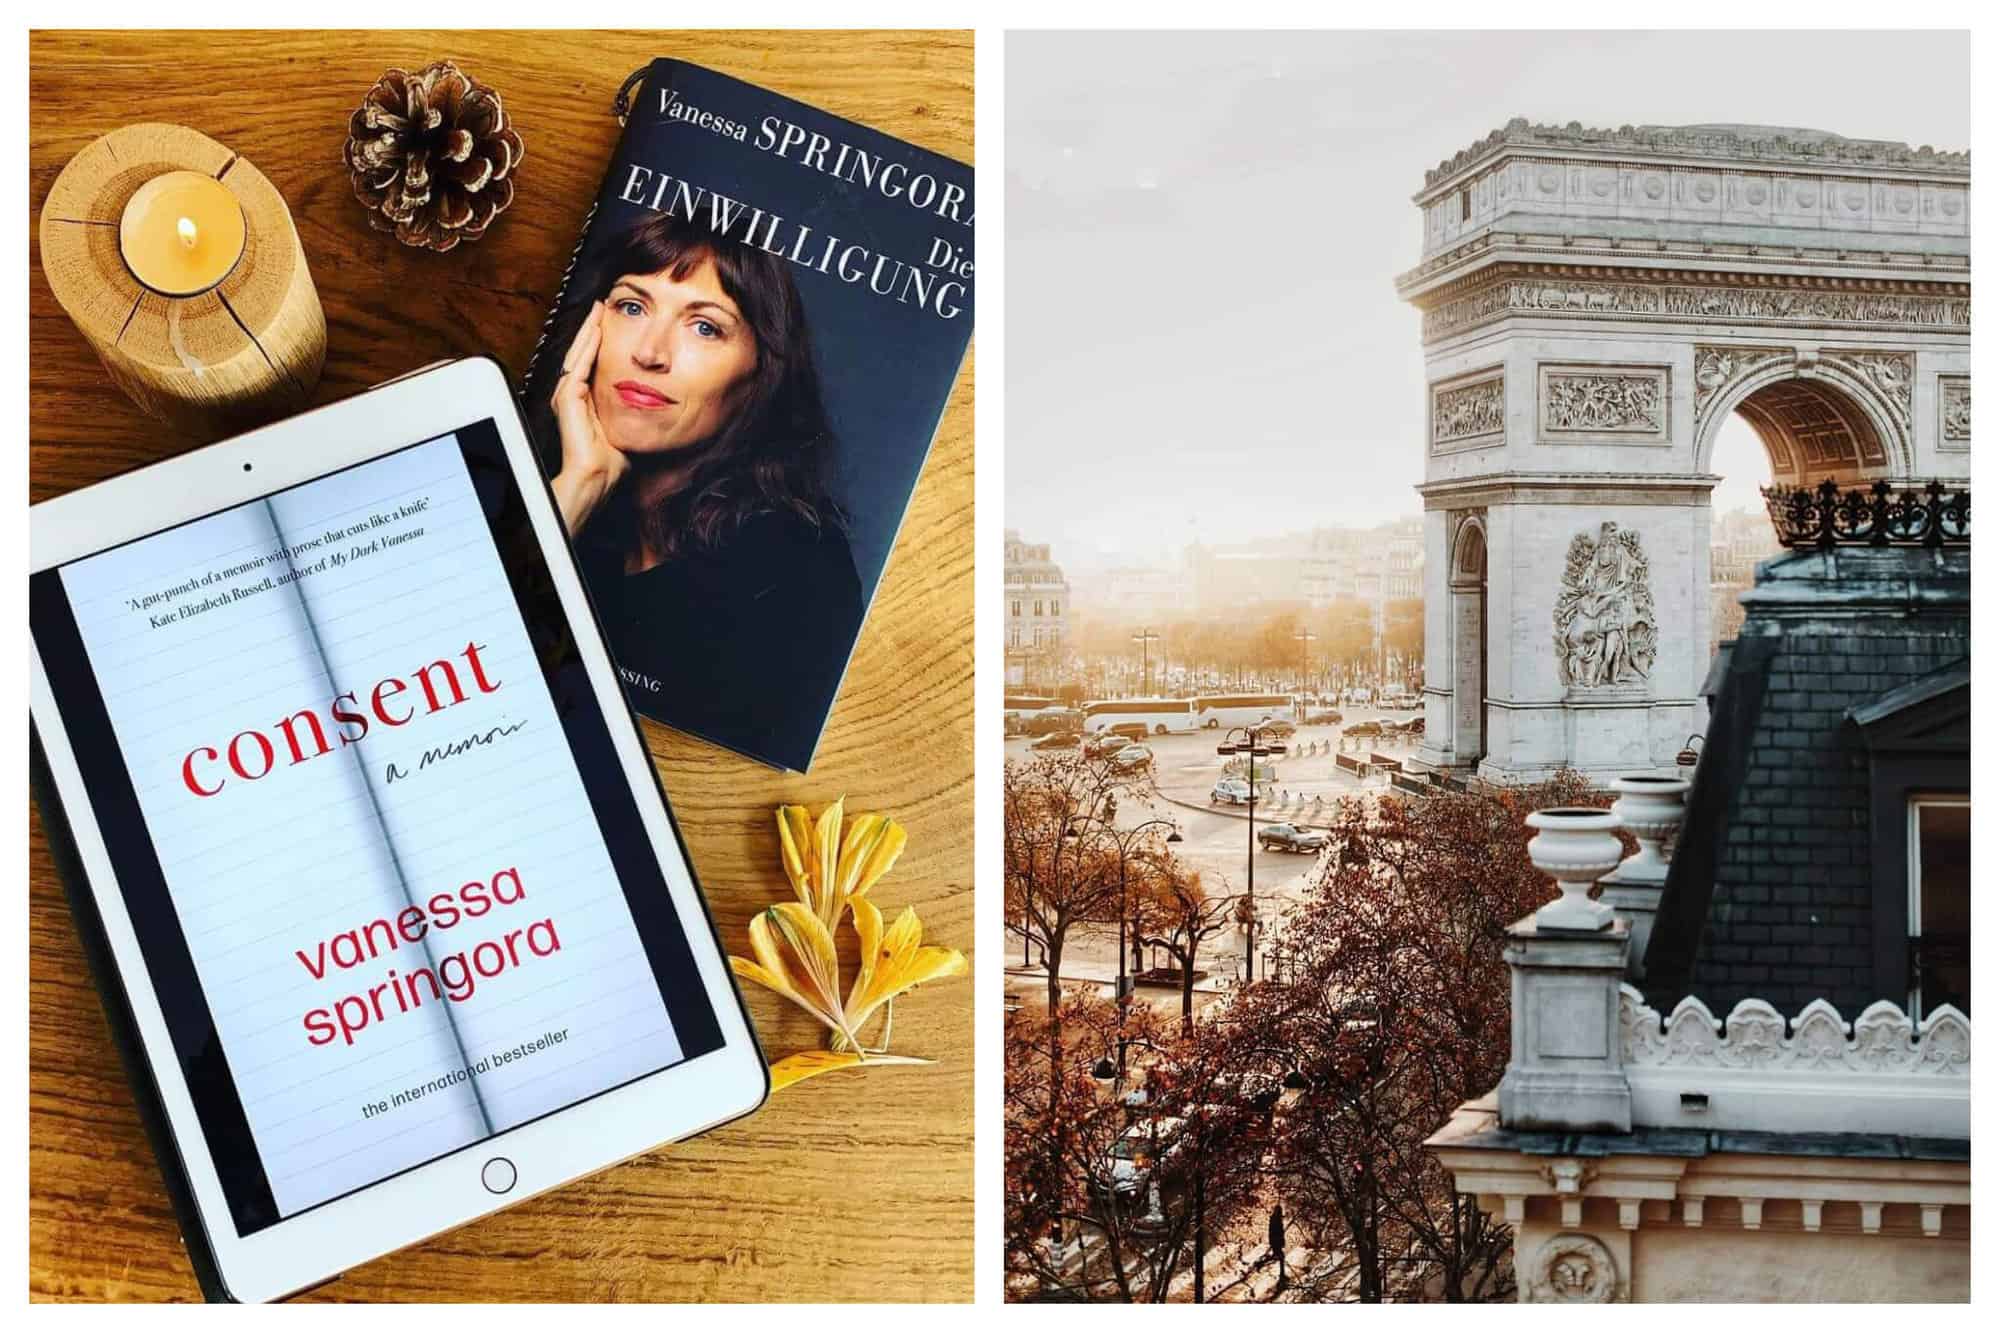 Left: A white iPad showing the title page of the ebook called "Consent: A Memoir" by french author Vanessa Springora. The iPad is lying on a german version of the same book with the face of the author holding her chin. Surrounding the iPad and the book is a candle, a pine cone and some petals of yellow flower. Right: A picture of the Arc de Triomphe in Paris with views of the round-about and the roof of another building in front of the Arc.